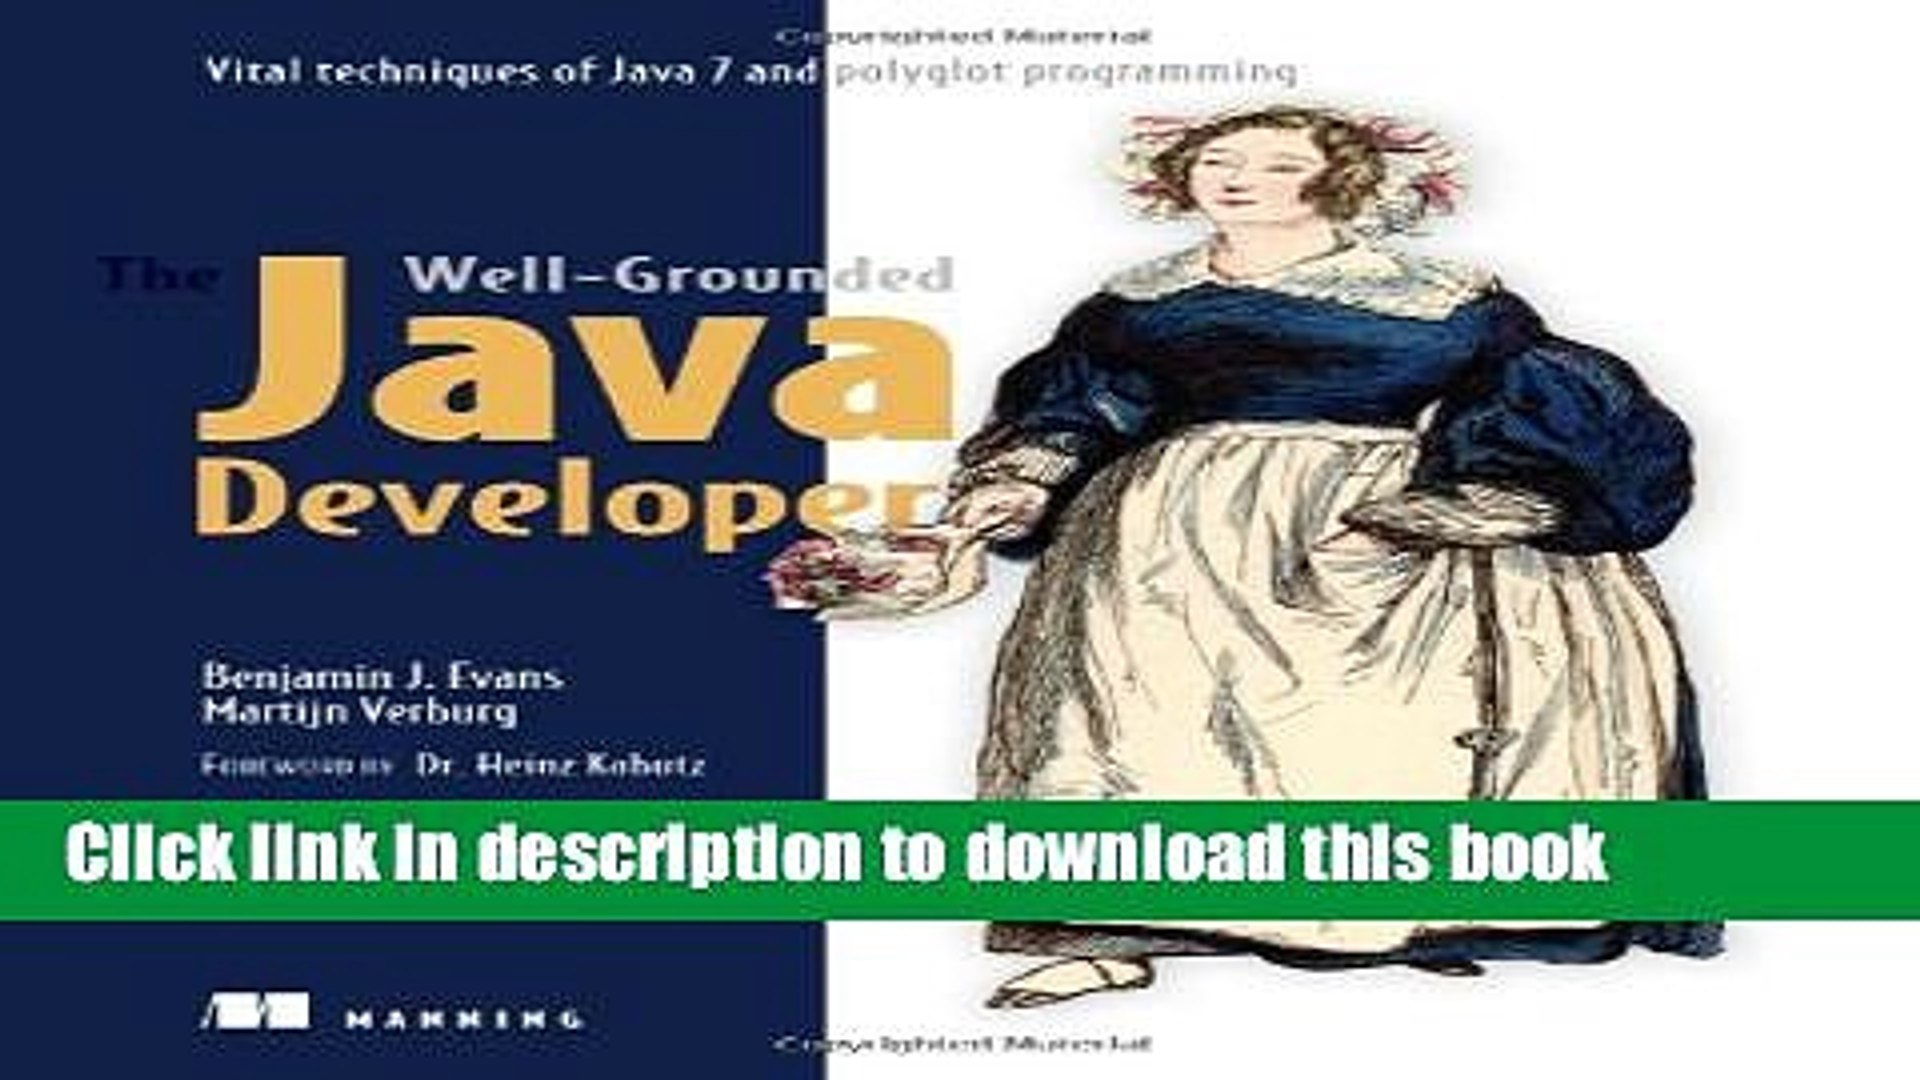 Ebook The Well-Grounded Java Developer: Vital techniques of Java 7 and polyglot programming Free